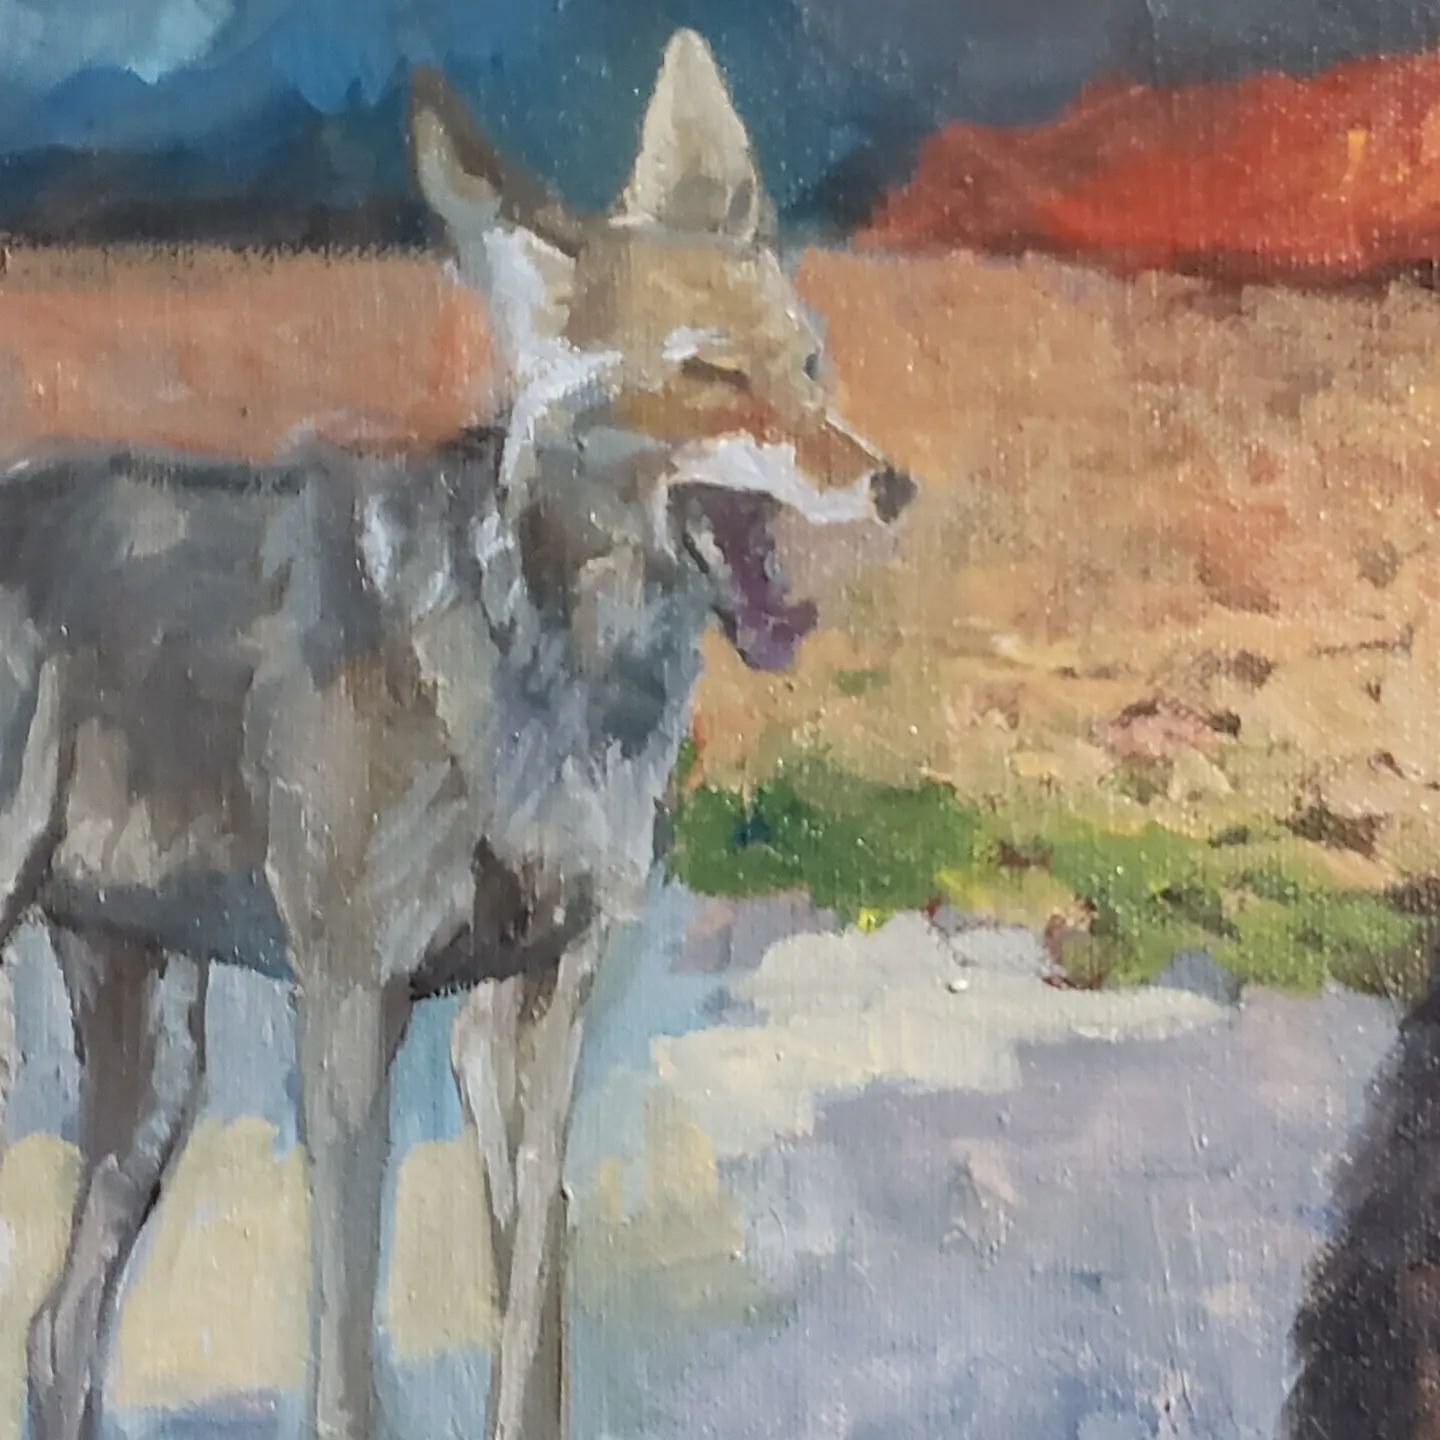 Detail sneak peek on another painting  I also started this week!  I am loving this one 😍❤ just had to share, that is all 🤗
.
.
.
.
#leonagamble #coyote #dreamon #singforthemoment #oilpainting #detail